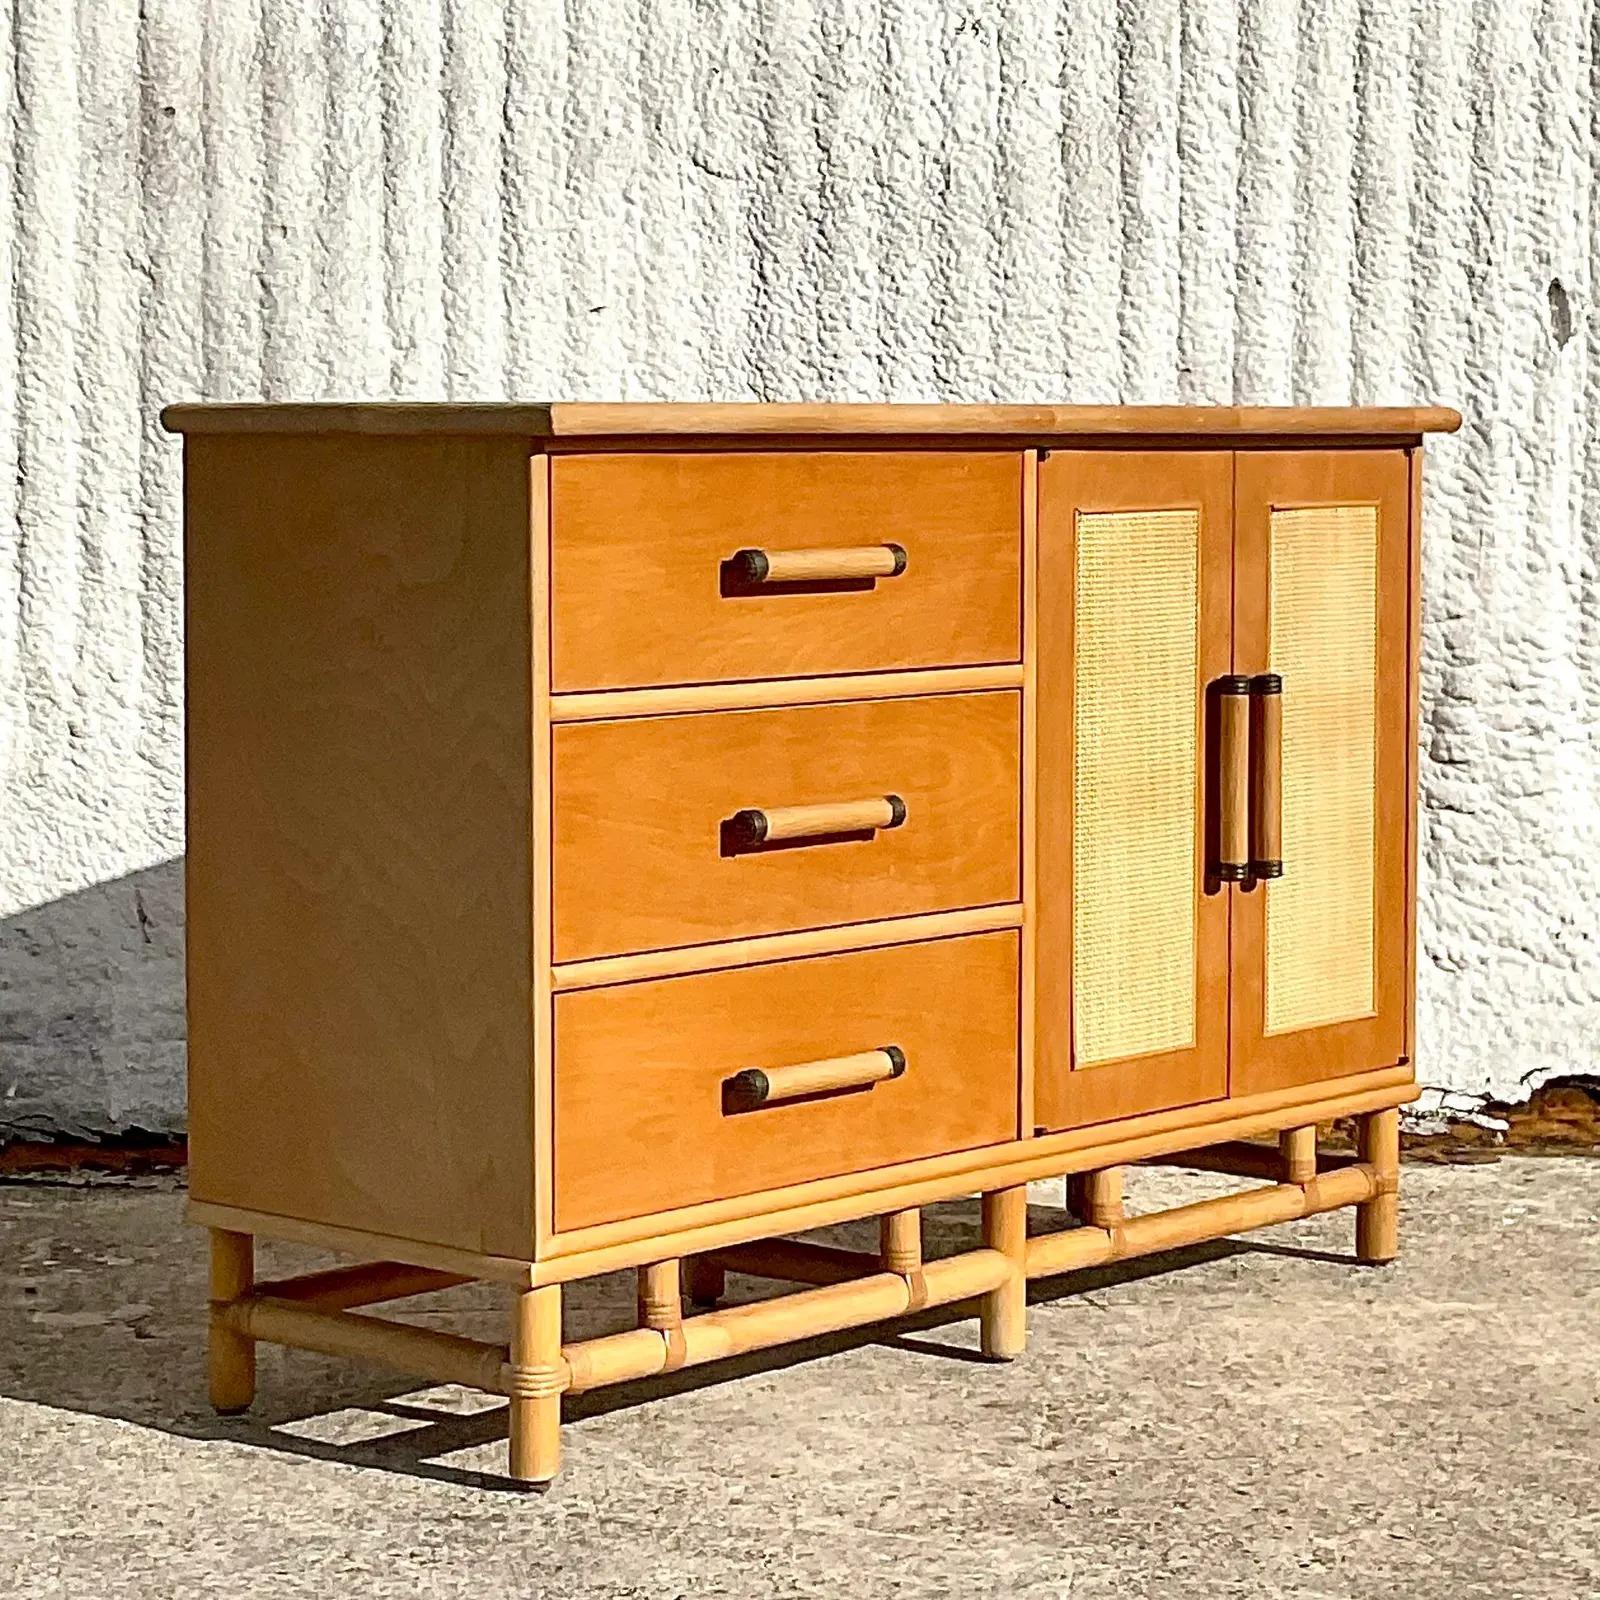 A fabulous vintage Costal sideboard. Beautiful vintage wood cabinet with dip cane front doors and bamboo pulls. A great little beautiful., yet functional piece. Acquired from a Palm Beach estate.